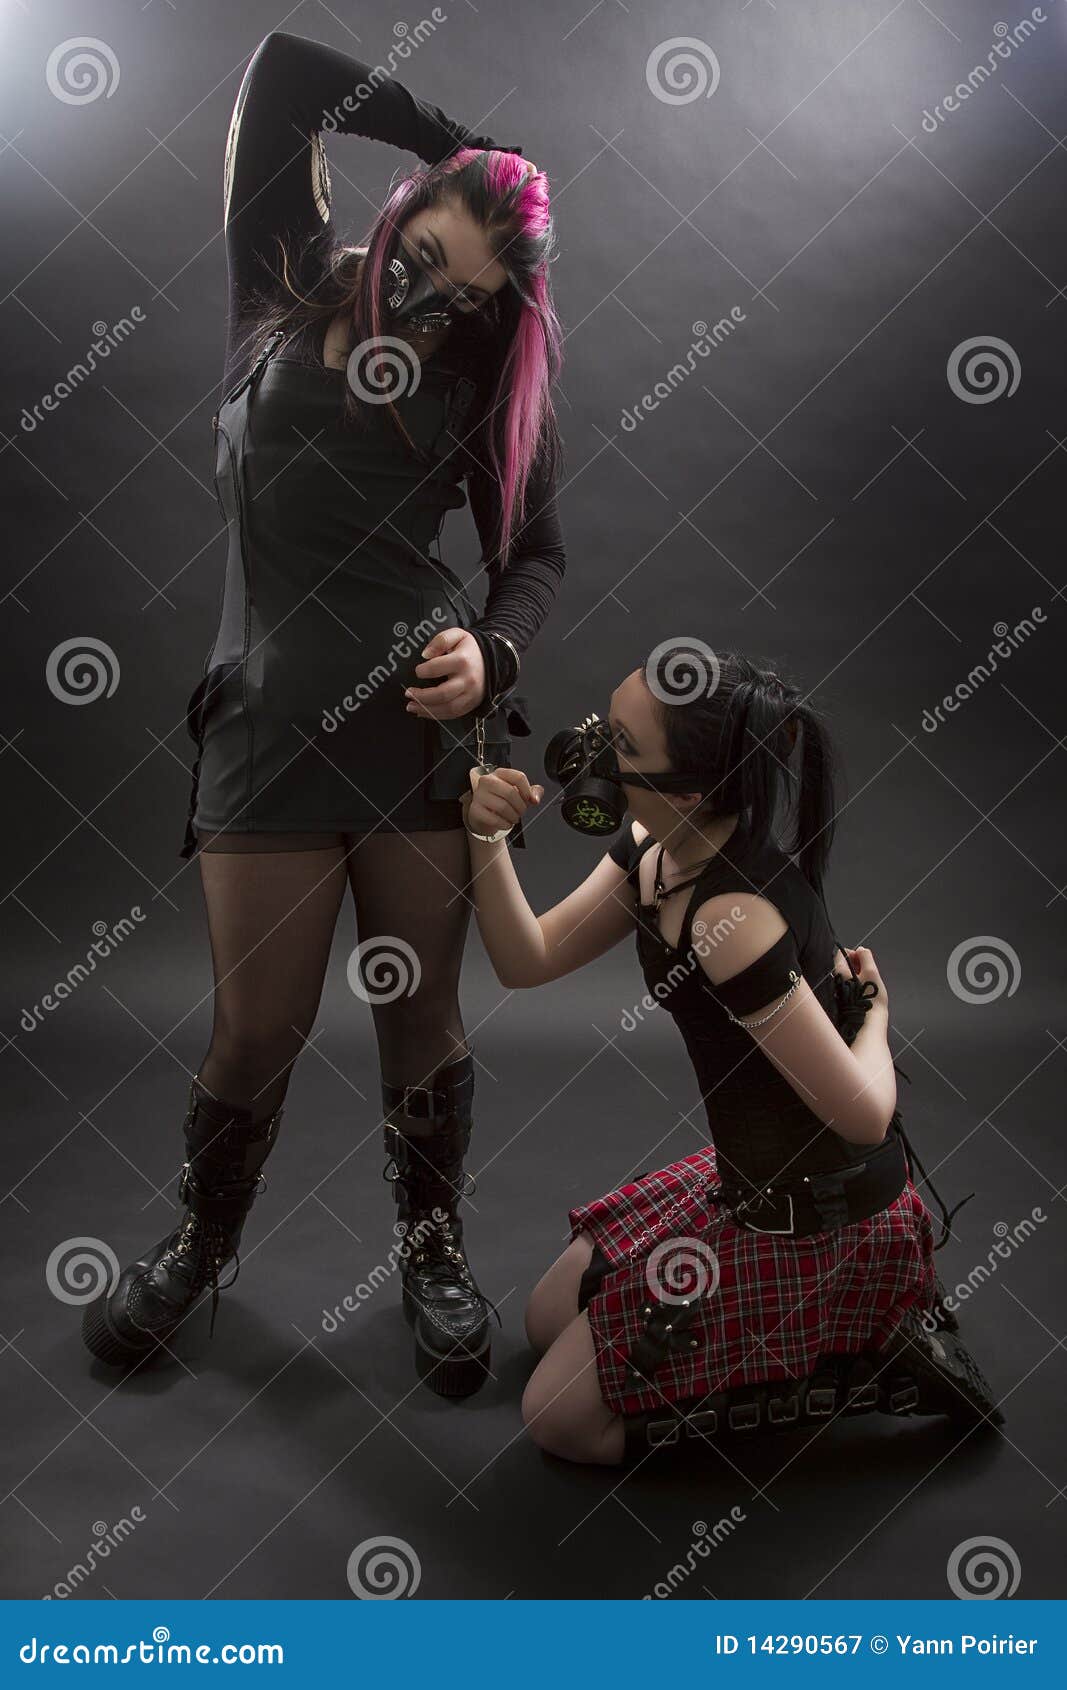 as say recommends mistress and her slave pic